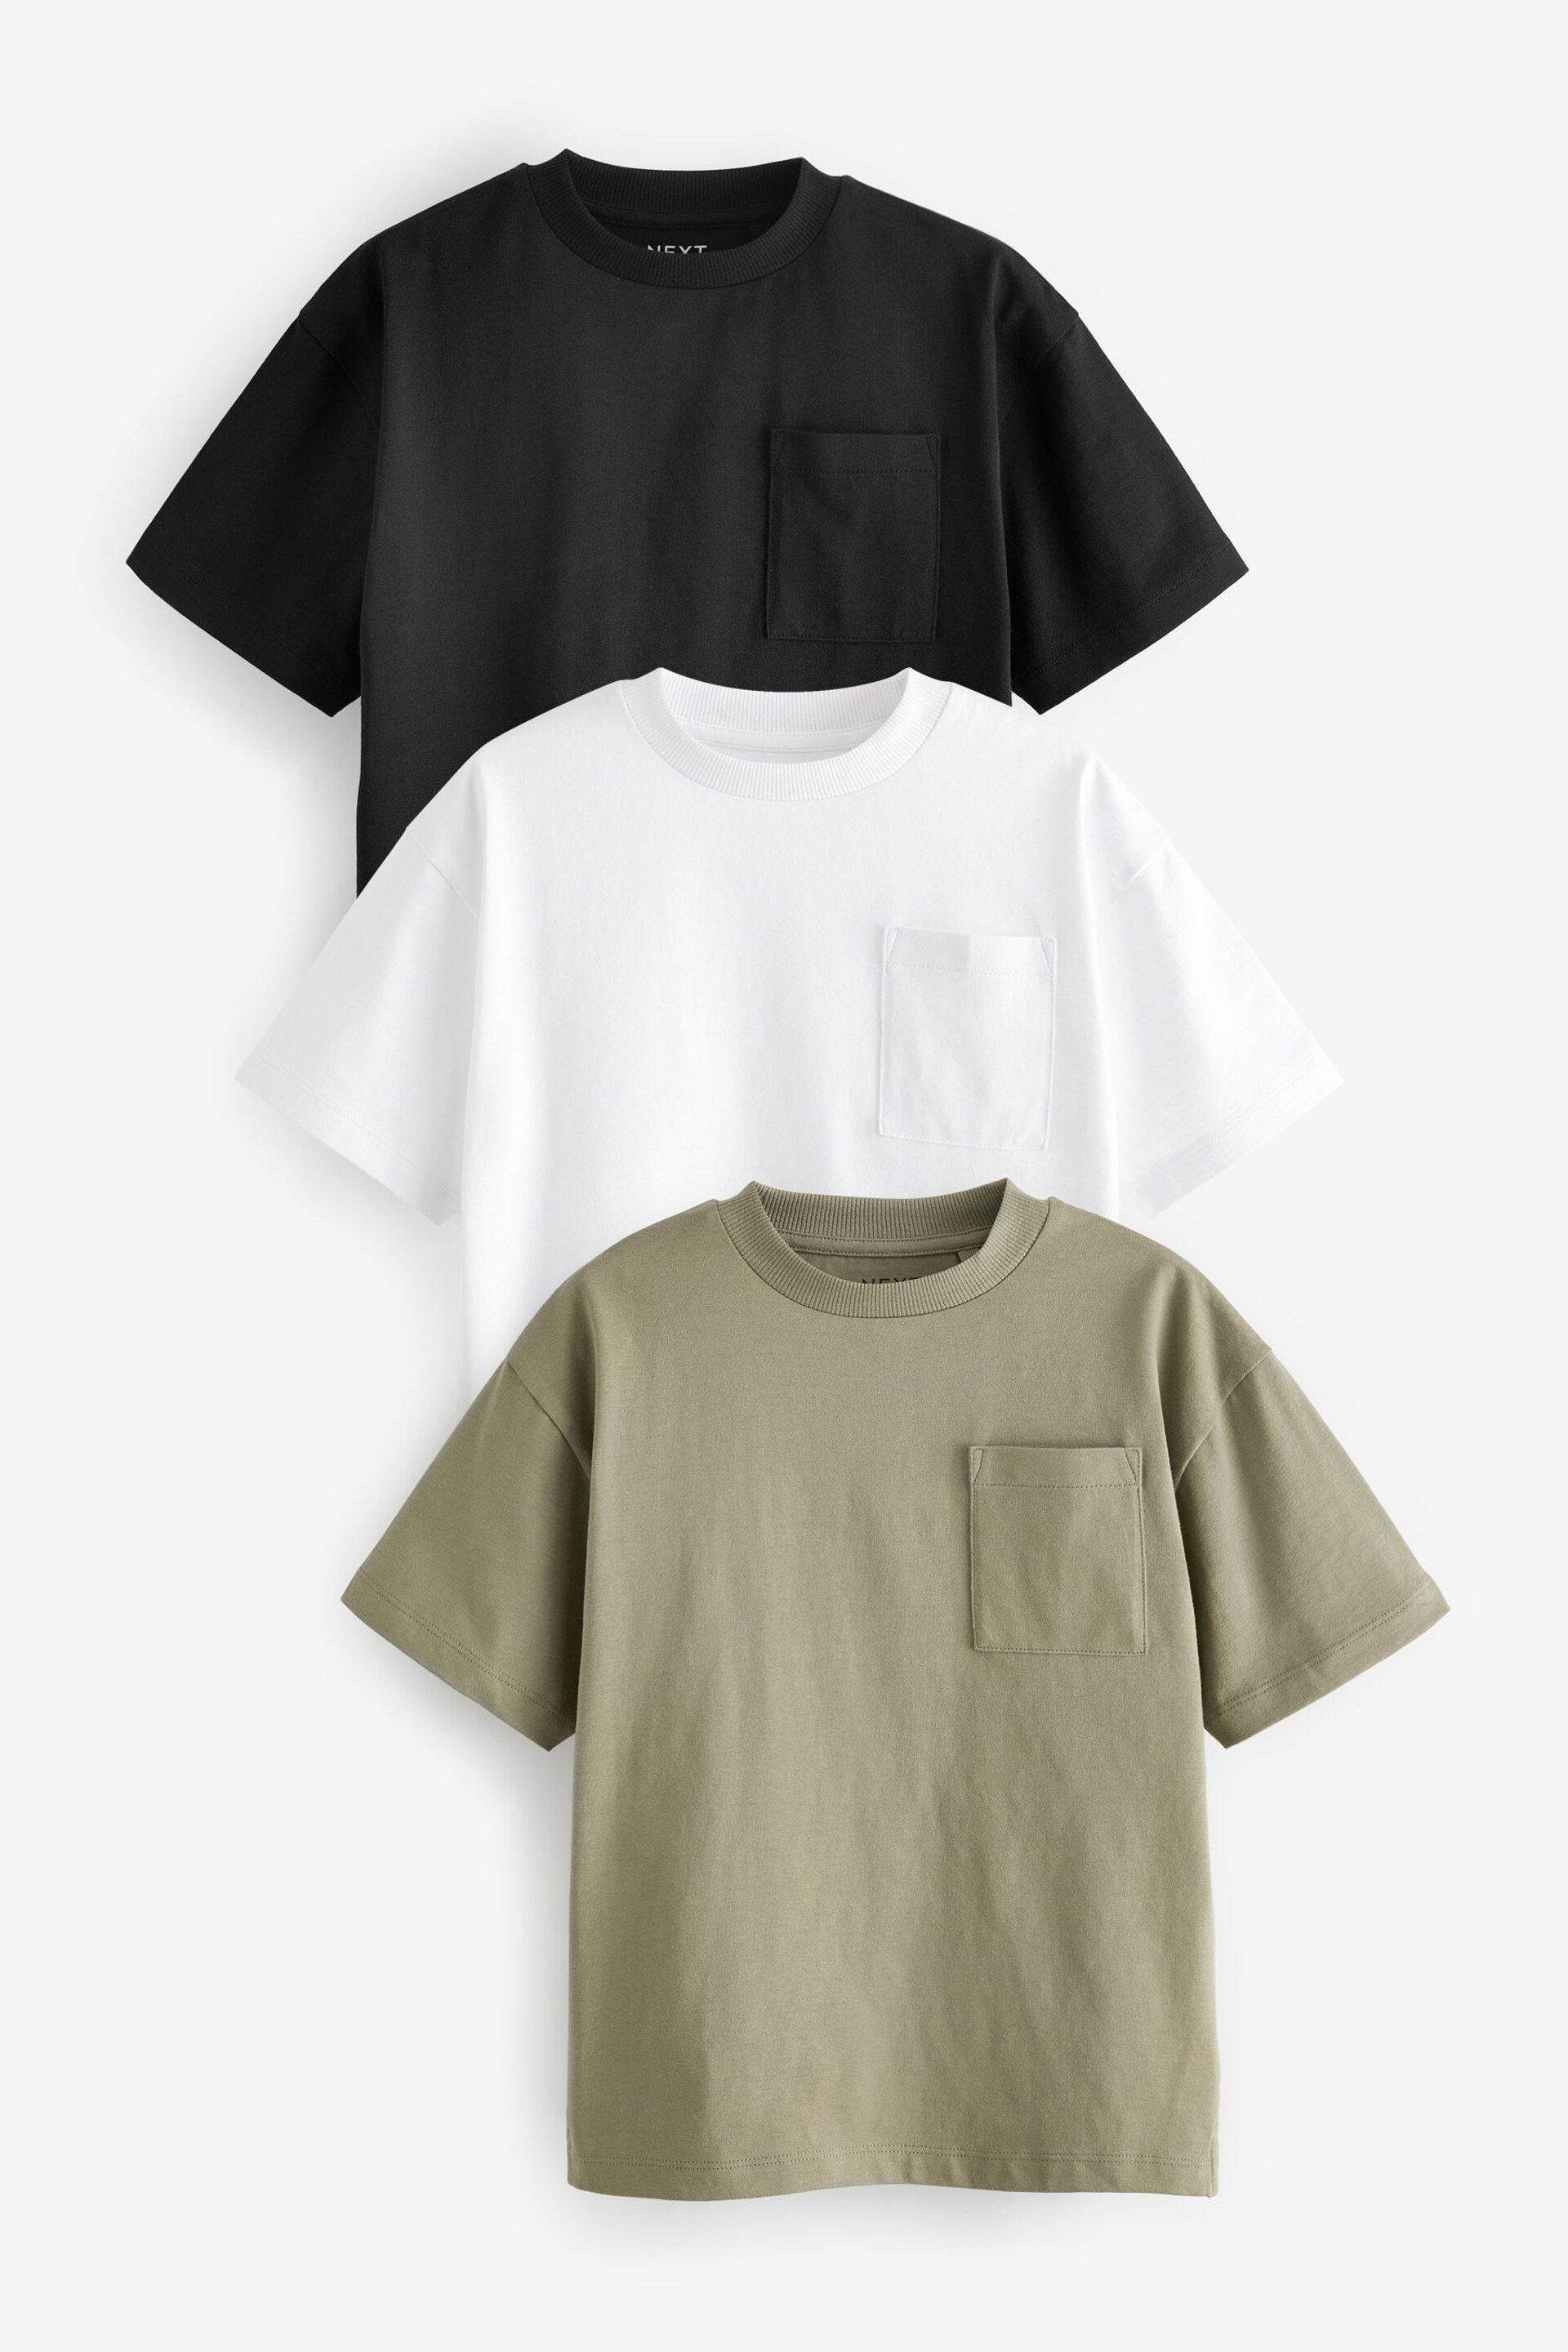 Khaki Green/Black Pocket Detail Relaxed Fit T-Shirt 3 Pack (3-16yrs) - Image 1 of 3